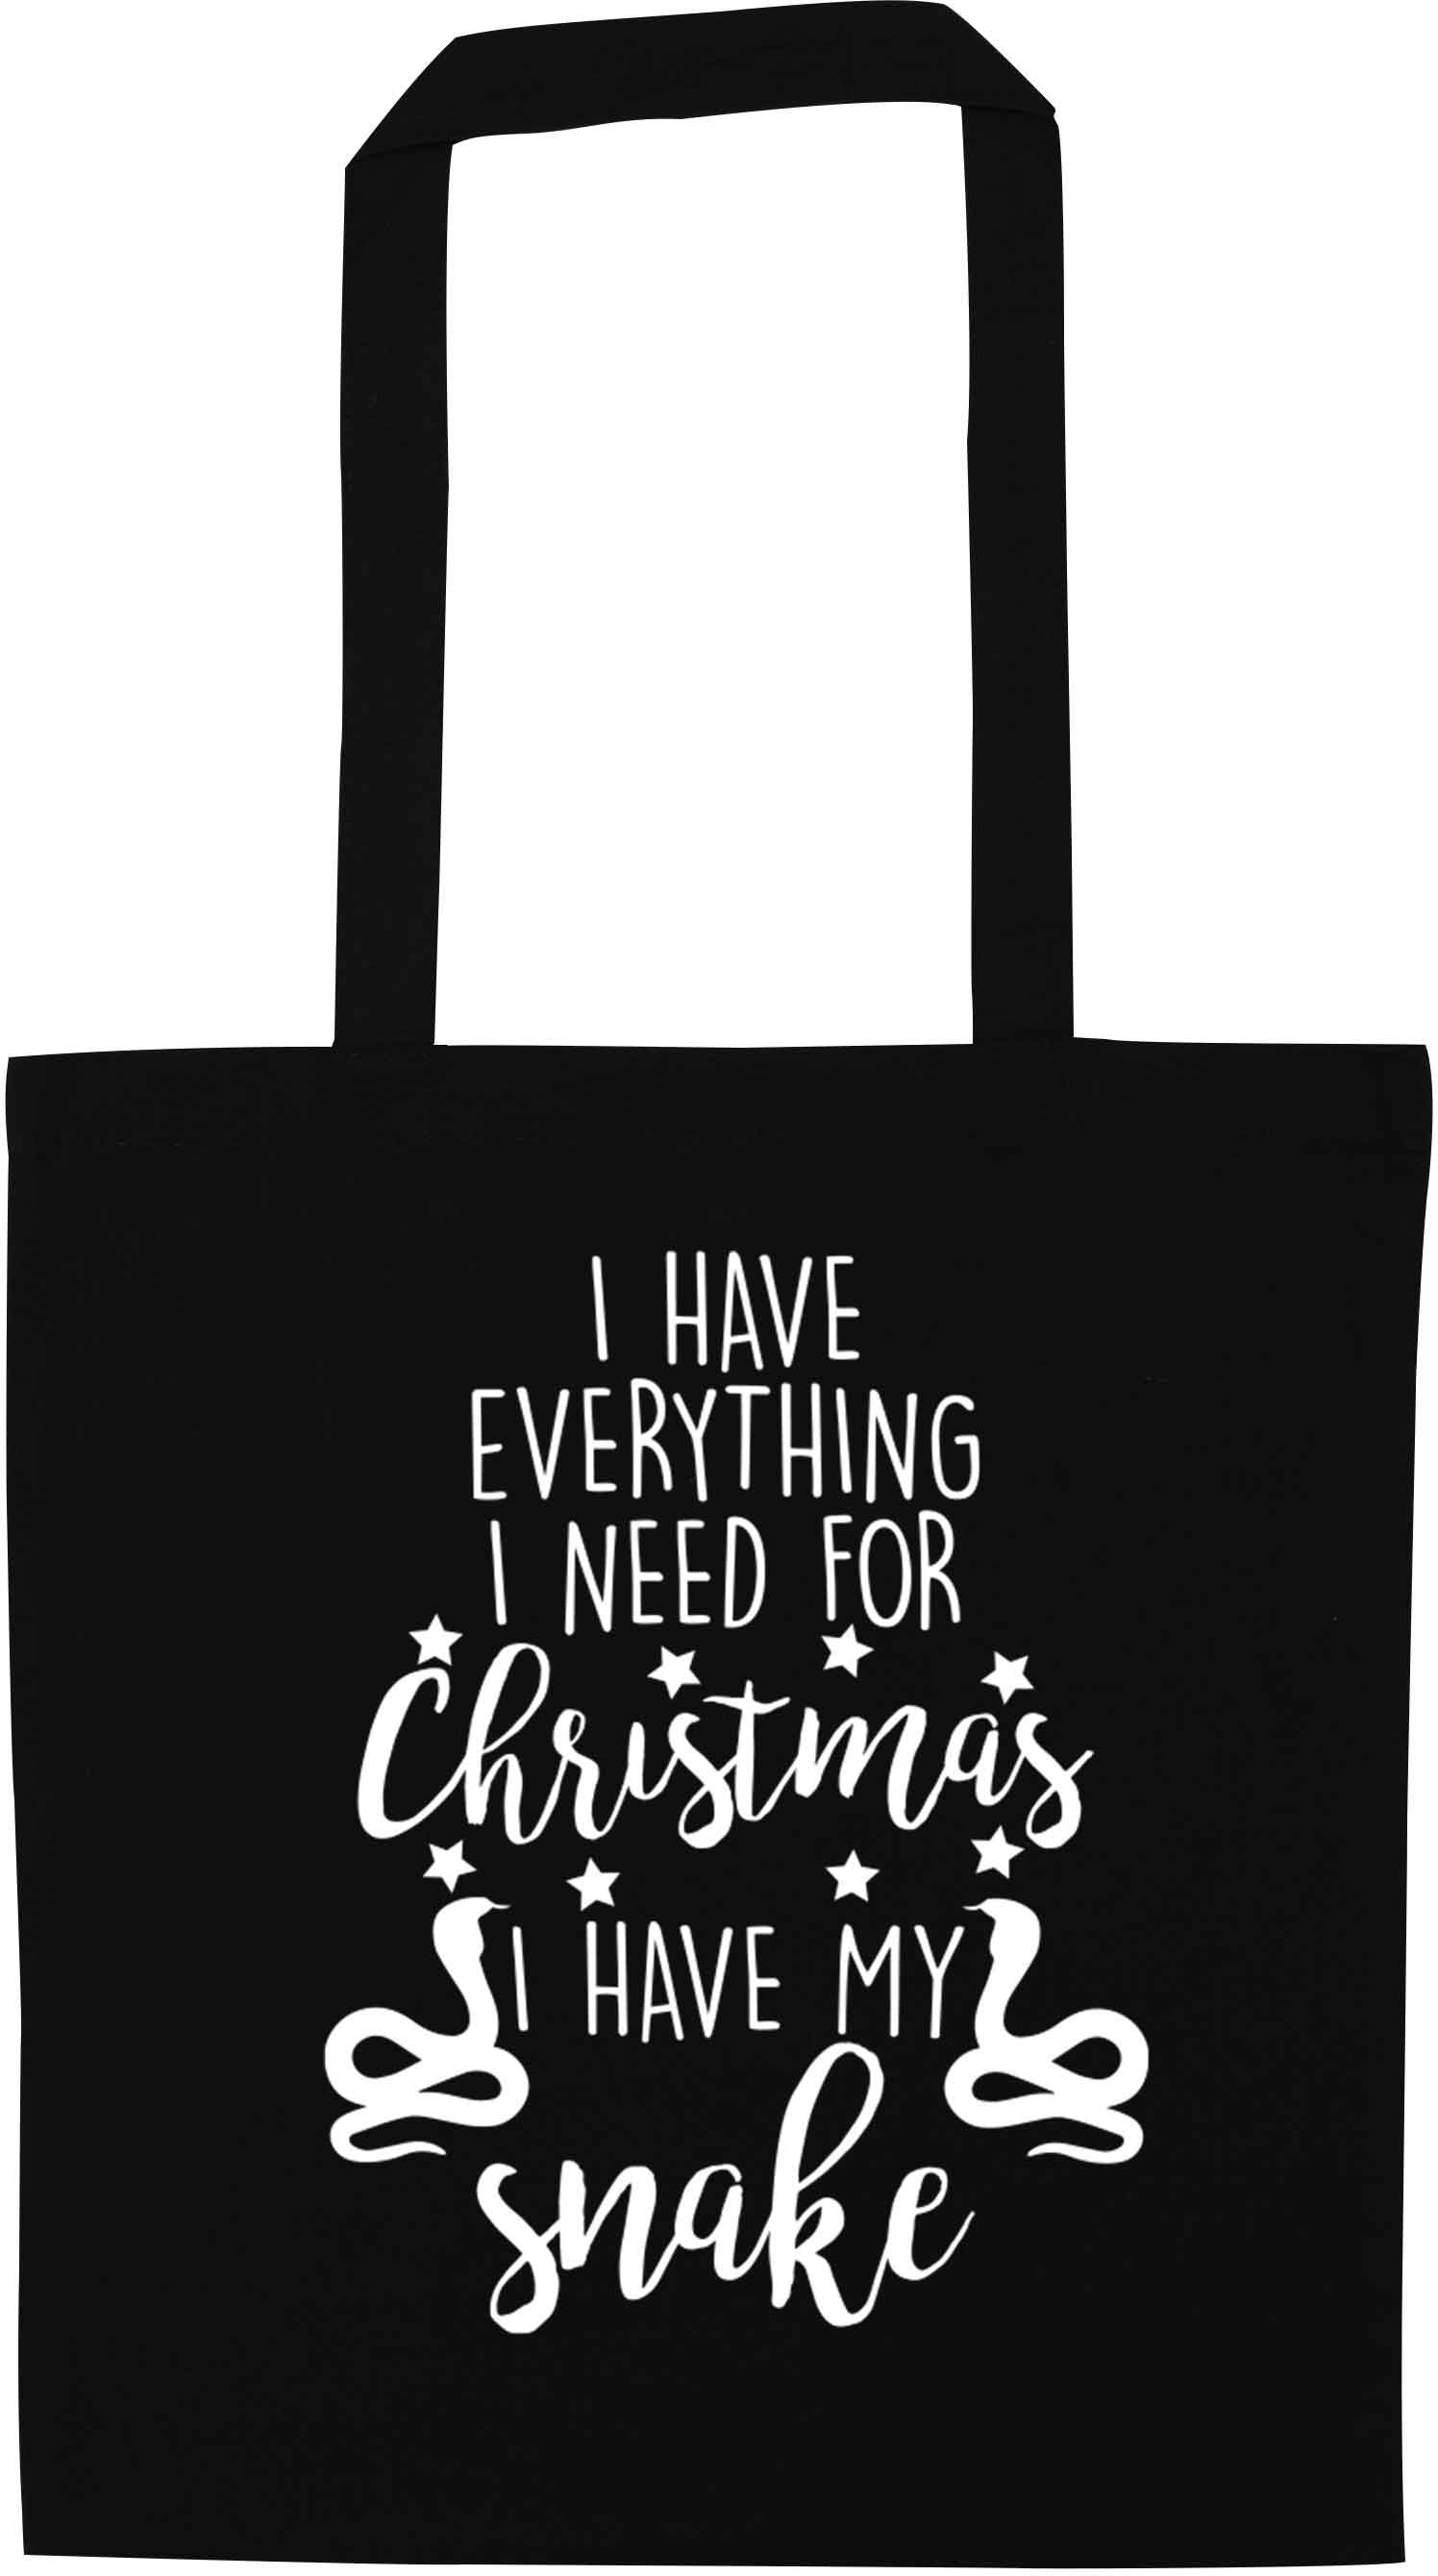 I have everything I need for Christmas I have my snake black tote bag